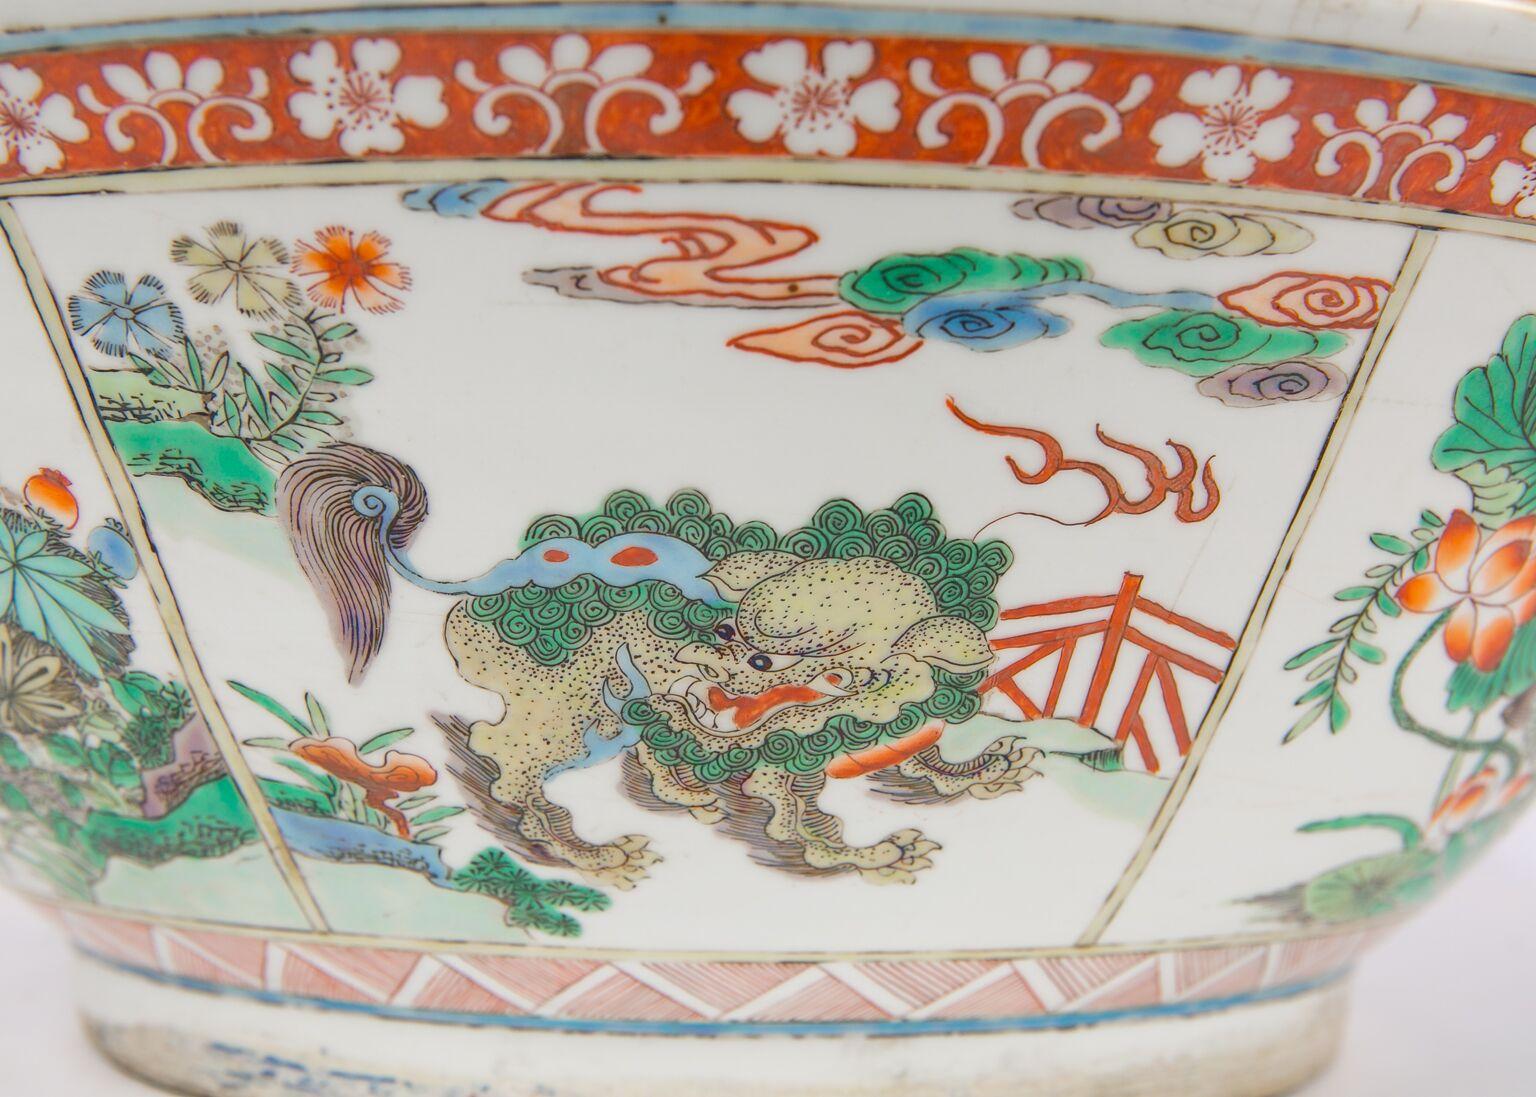 Qing Large Antique Chinese Bowl Decorated in Famille Verte Enamels, Circa 1900